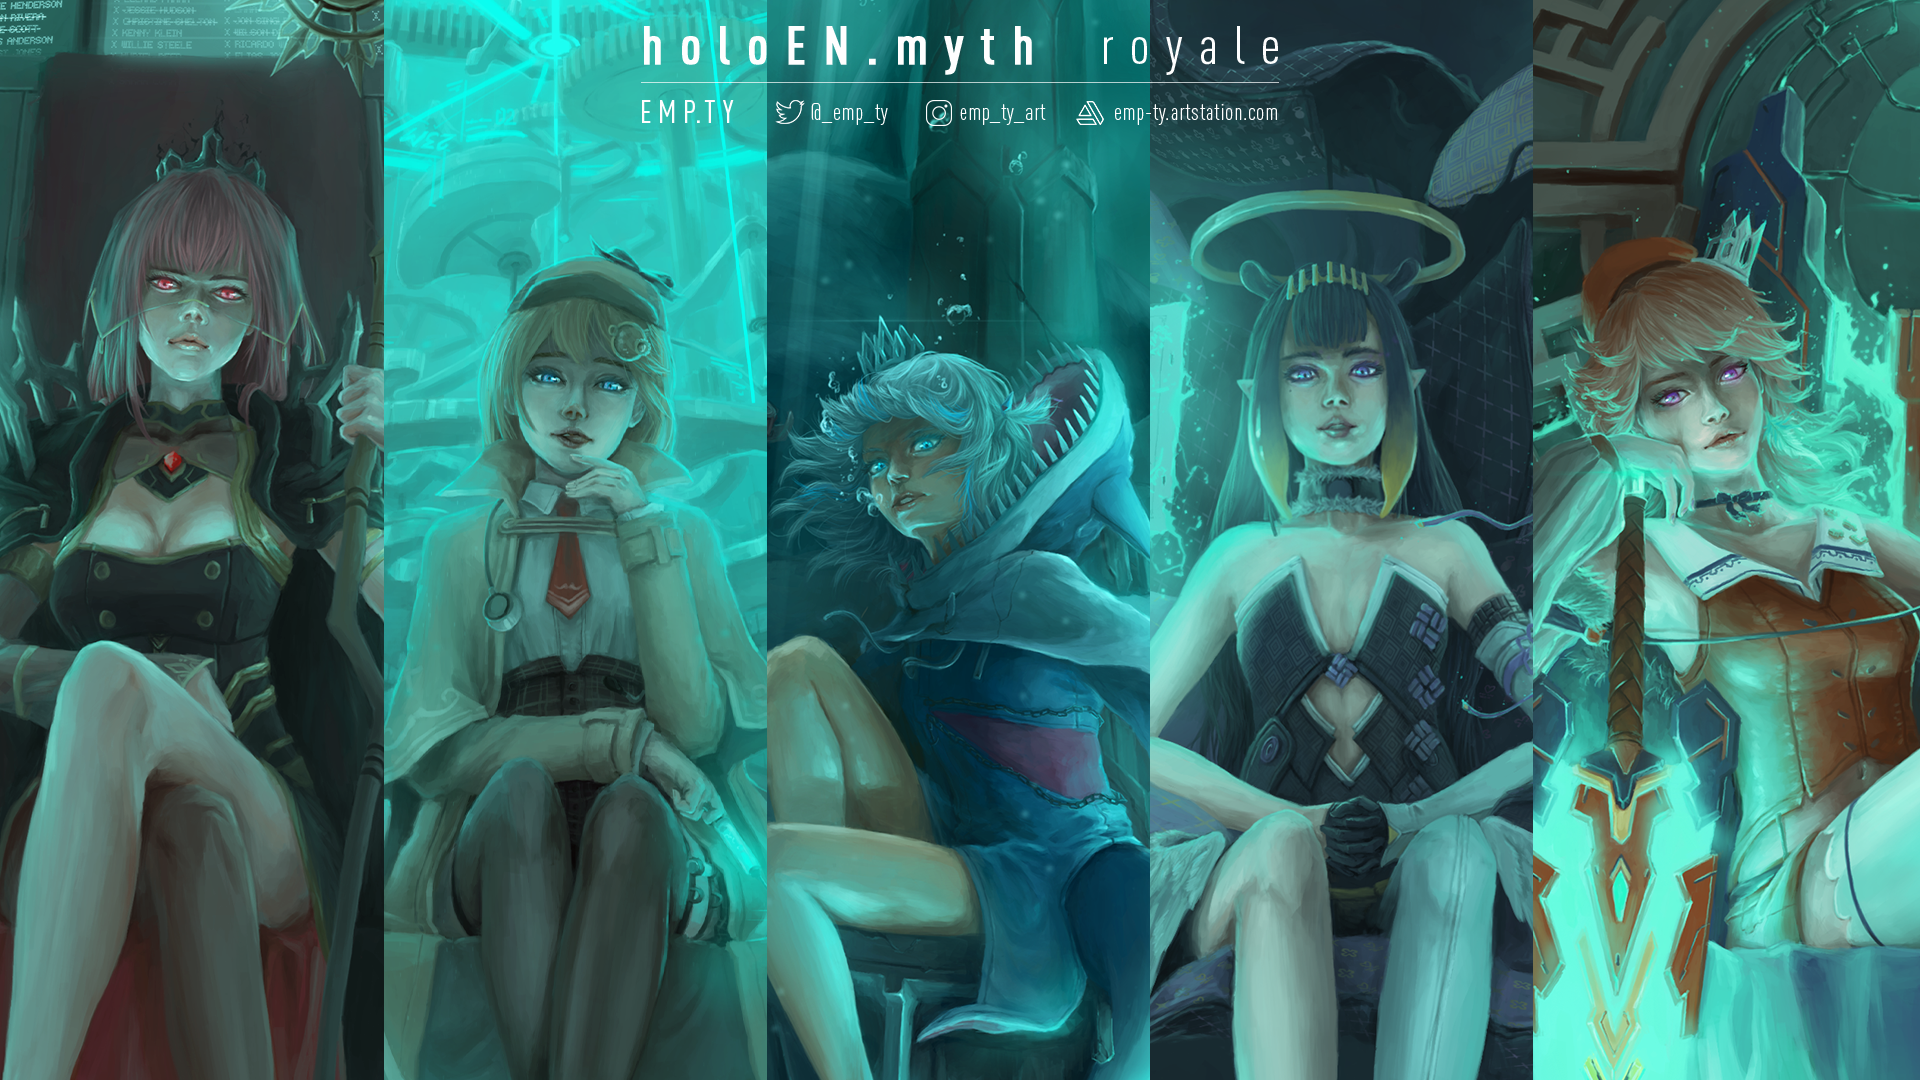 Royale Hololive Myth Set. (full versions in comments)